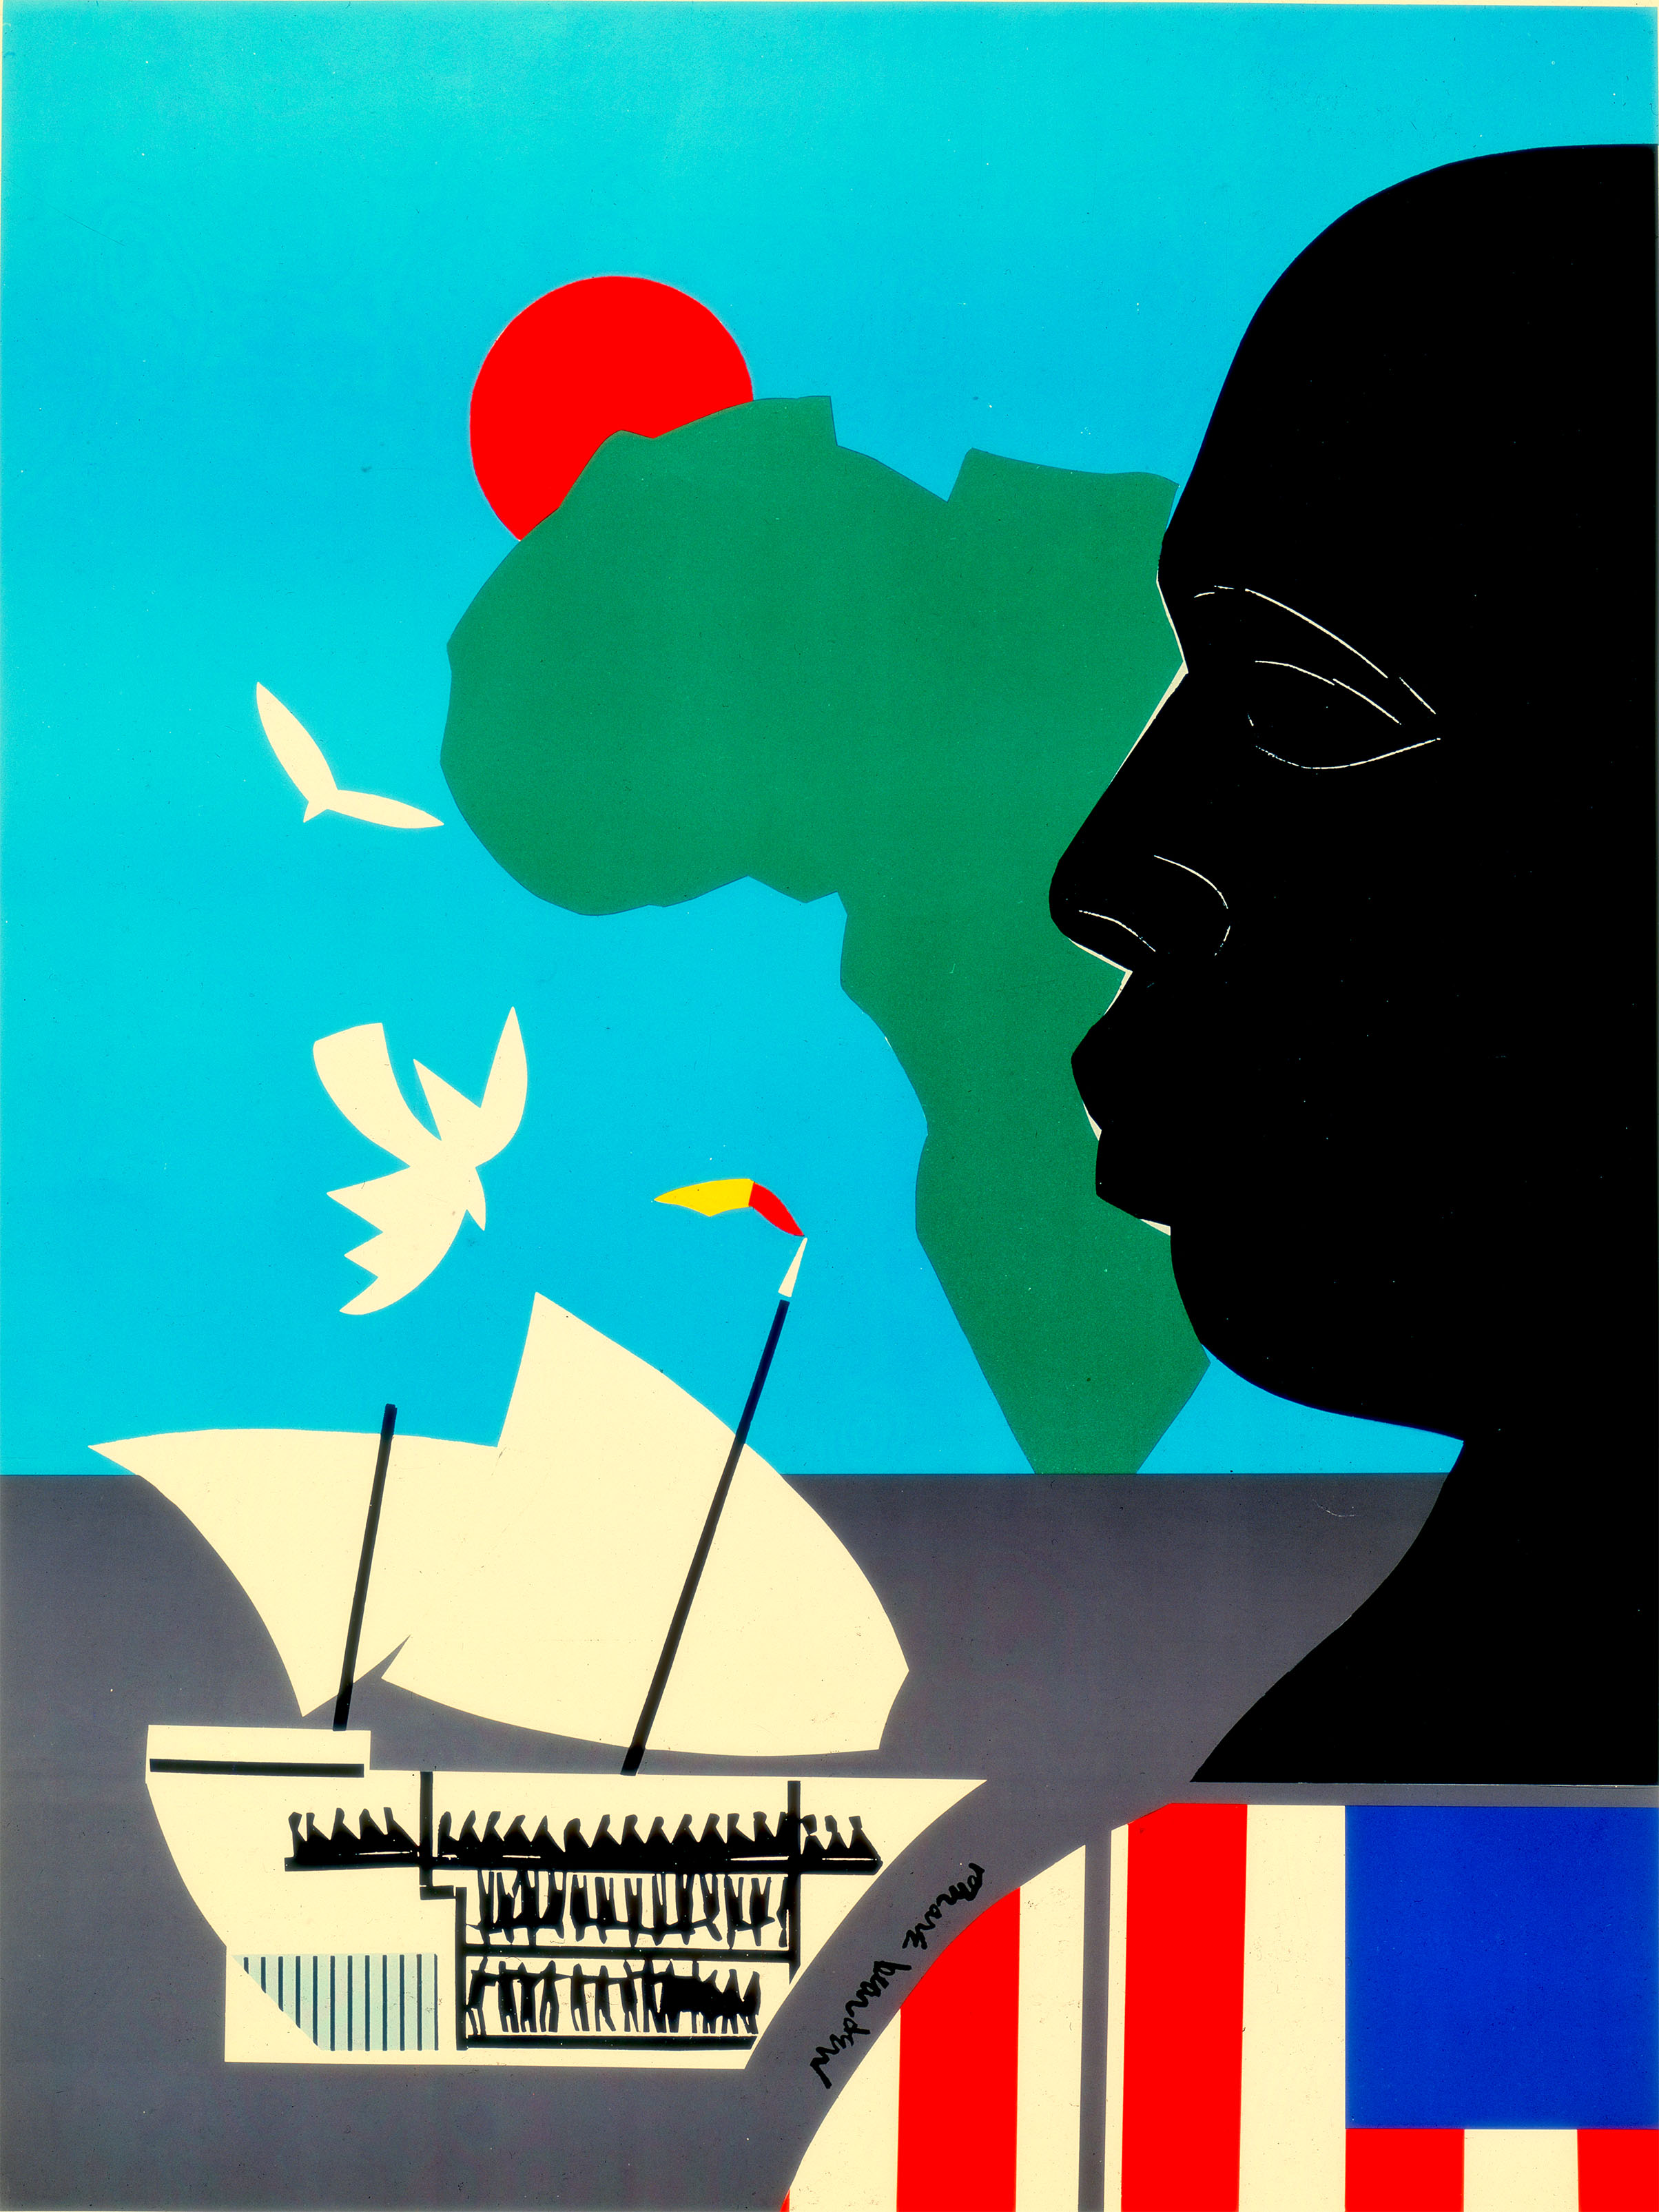 black silhouette of man with African features wearing American flag with African continent and slave ship behind him